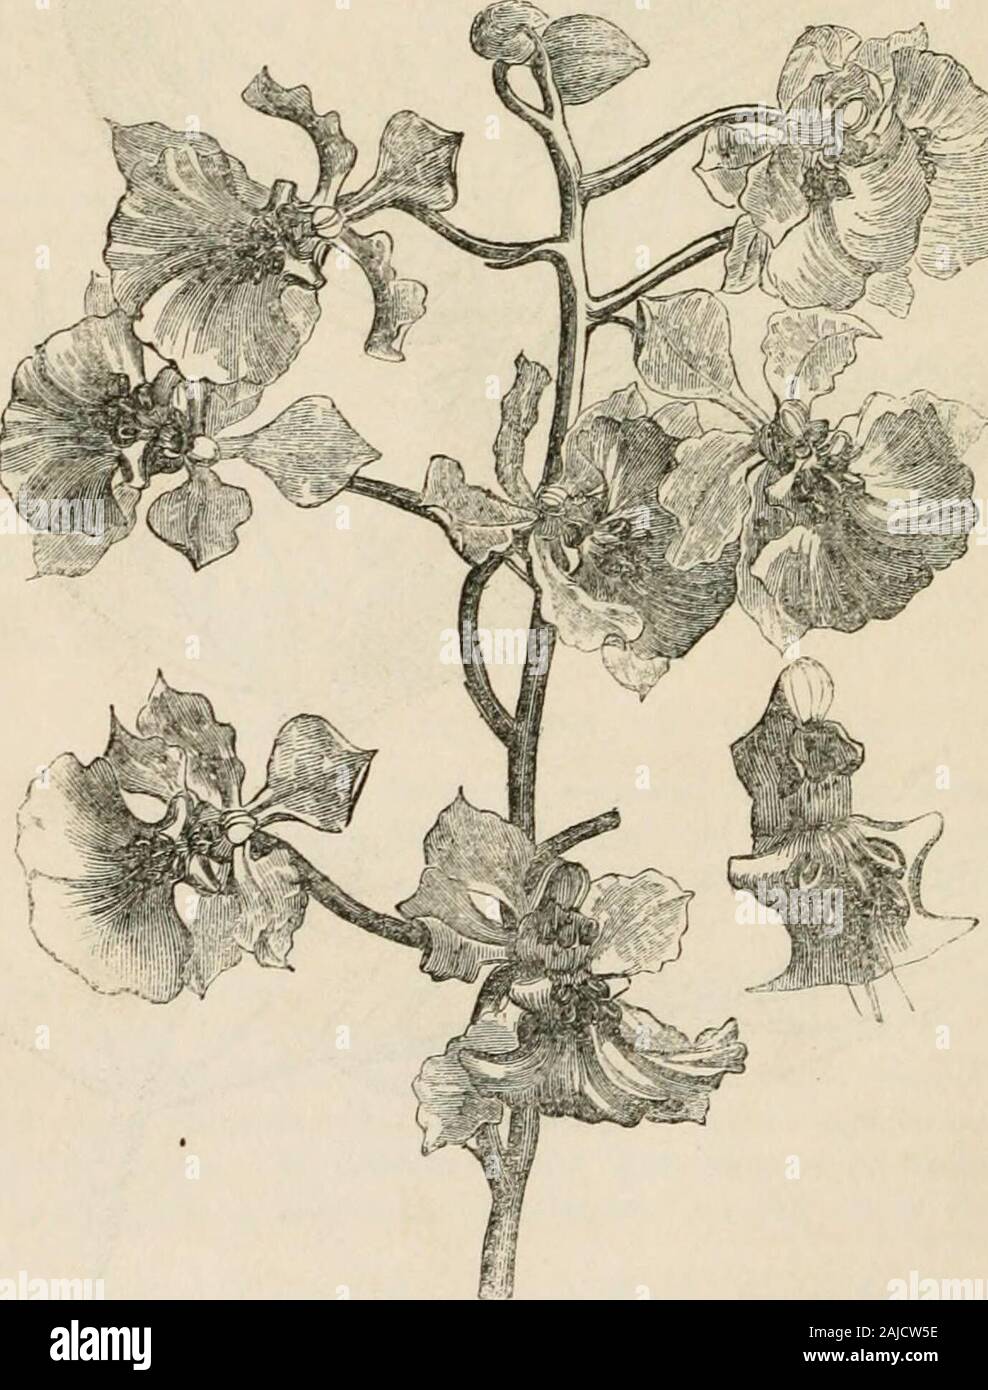 The journal of the Horticultural Society of London . Lonicera tiitarica, var. pnuicea. 54 NEW PLANTS, ETC., 3. OxciDiuM LURiDUM ; alratum. Collected by Hartweg for tlie Horticultural Society atTampico. AVhether or not O. luridum is really a mere variety of theCarthagena Oncid becomes moie and more doubtful as ourknowledge of such plants extends. In the present instance it isunnecessary to open that question, the plant now mentionedbeing undoubtedly a veiy fine form of the lurid Oncid, whateverthe relation of the latter to the Carthagena Oncid may finallyprove to be. With the habit of tlie comm Stock Photo